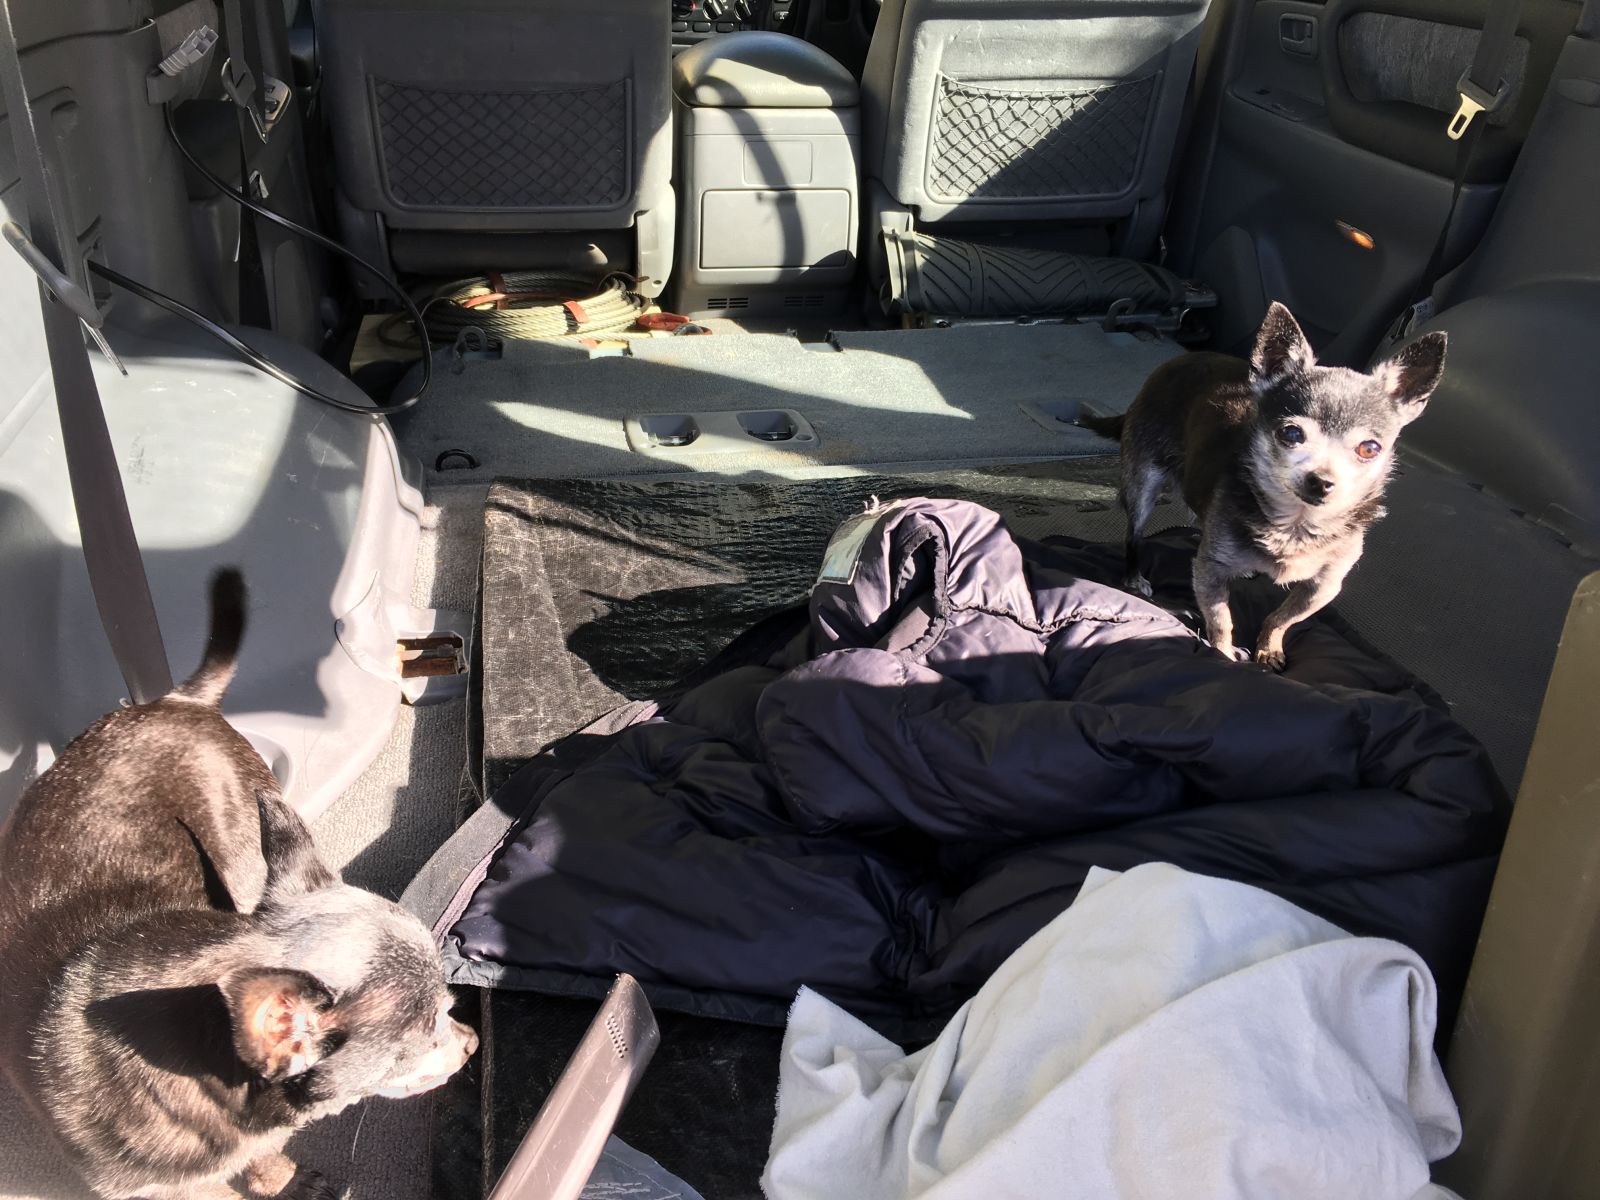 The dogs knew something was going on. To save them getting under my feet I just put them in the truck, then they know they are not getting left behind.